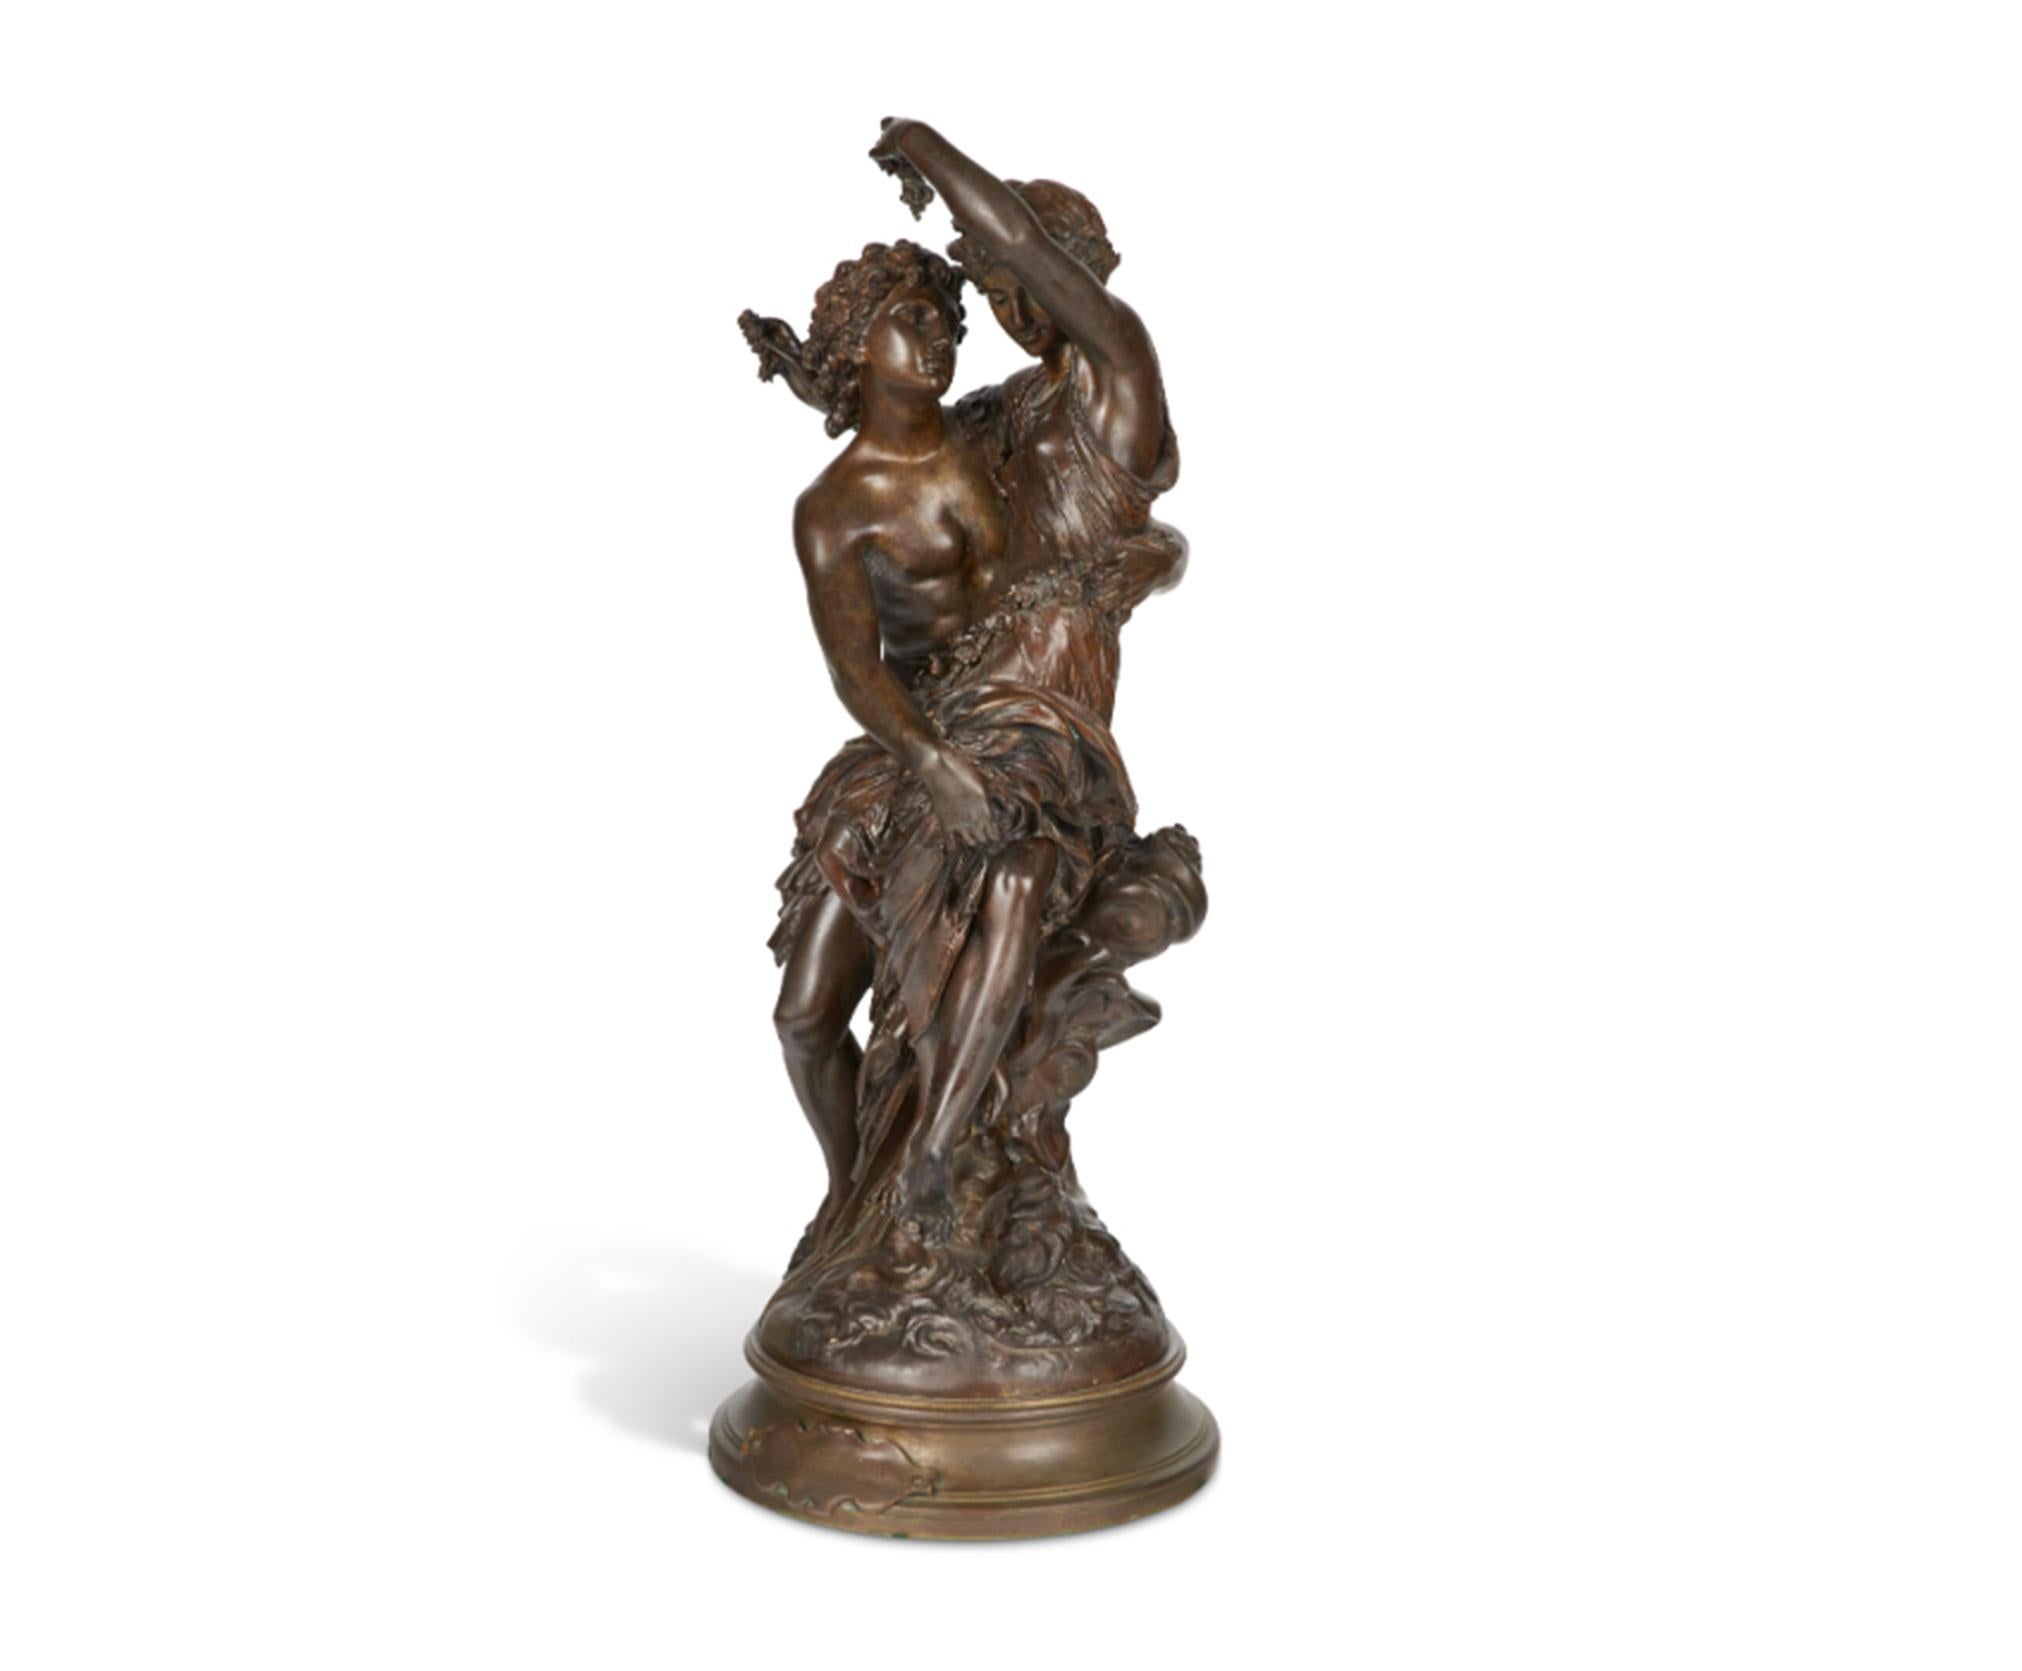 Patinated bronze figural statue depicting Zephyrus, god of the west wind, as he embraces his bride Flora. The couple are seen draped in flowers as if they have just married.
Flore et Zephyr
Signed 'Mthrin Moreau' (to the base), rotating socle